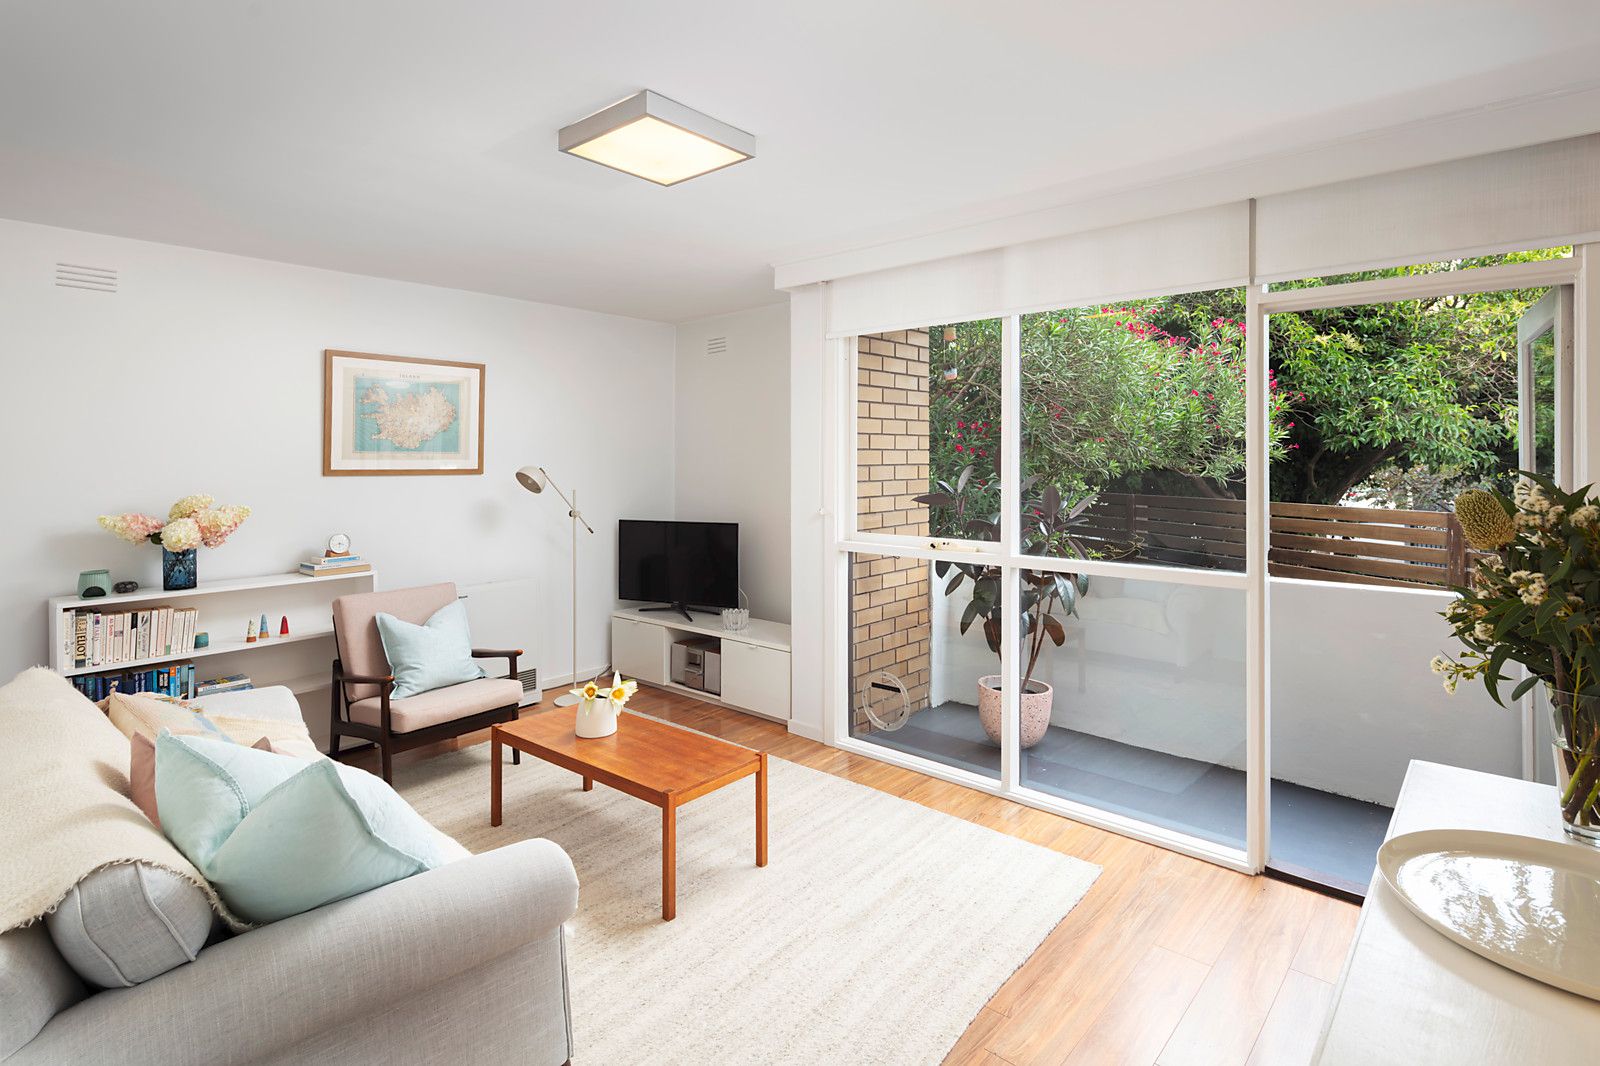 2 bedrooms Apartment / Unit / Flat in 1/109 Spensley Street CLIFTON HILL VIC, 3068